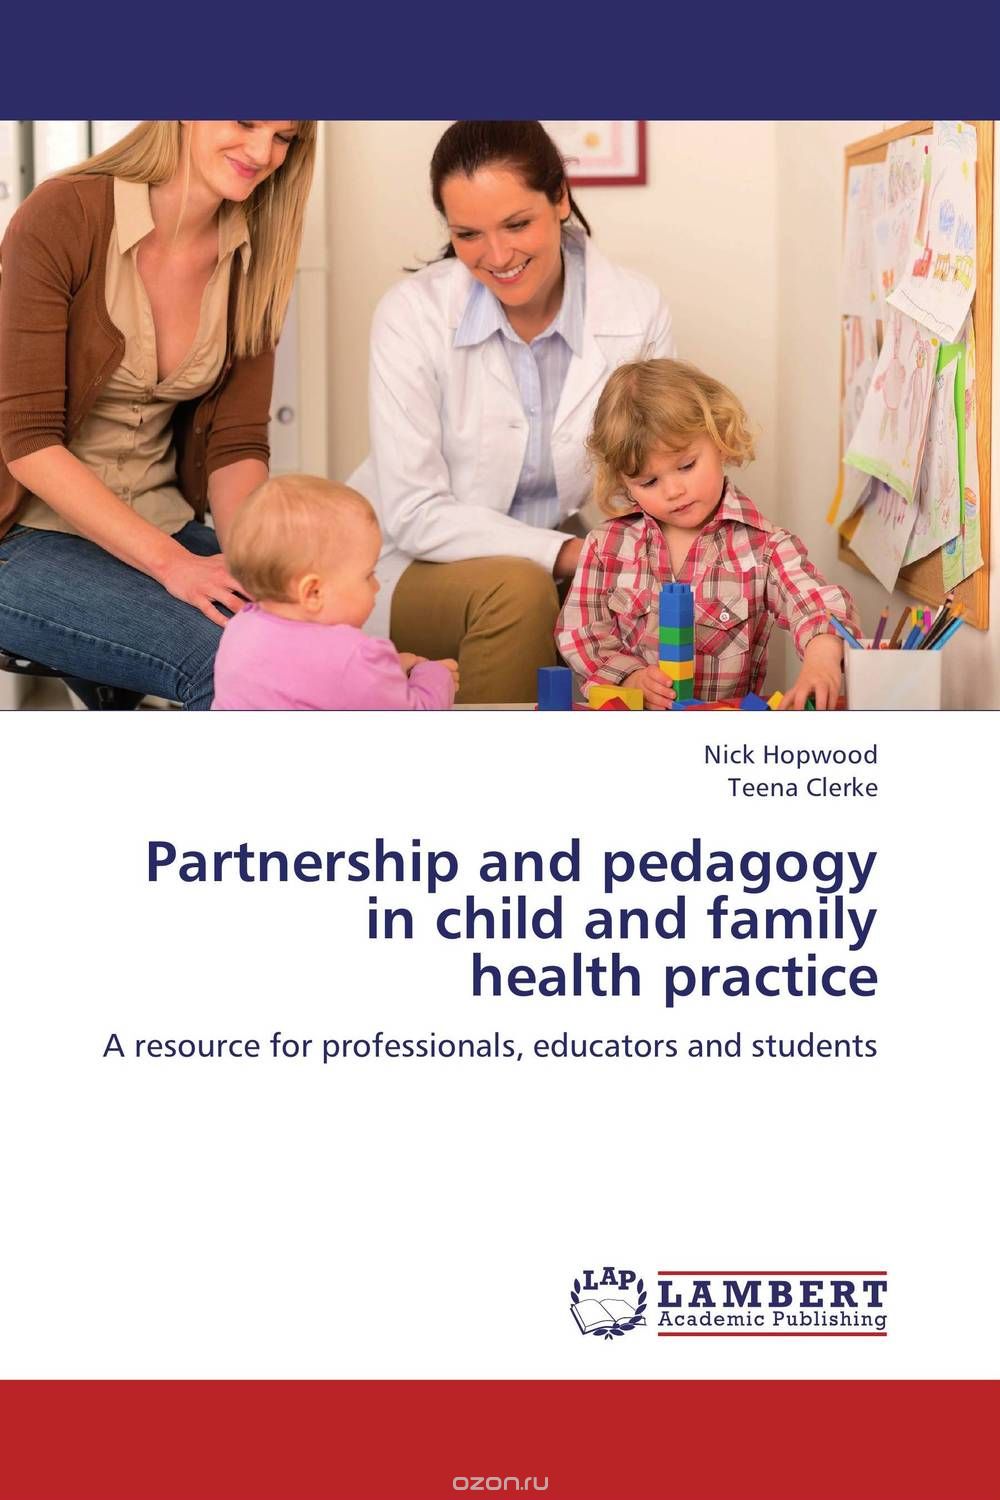 Partnership and pedagogy  in child and family  health practice